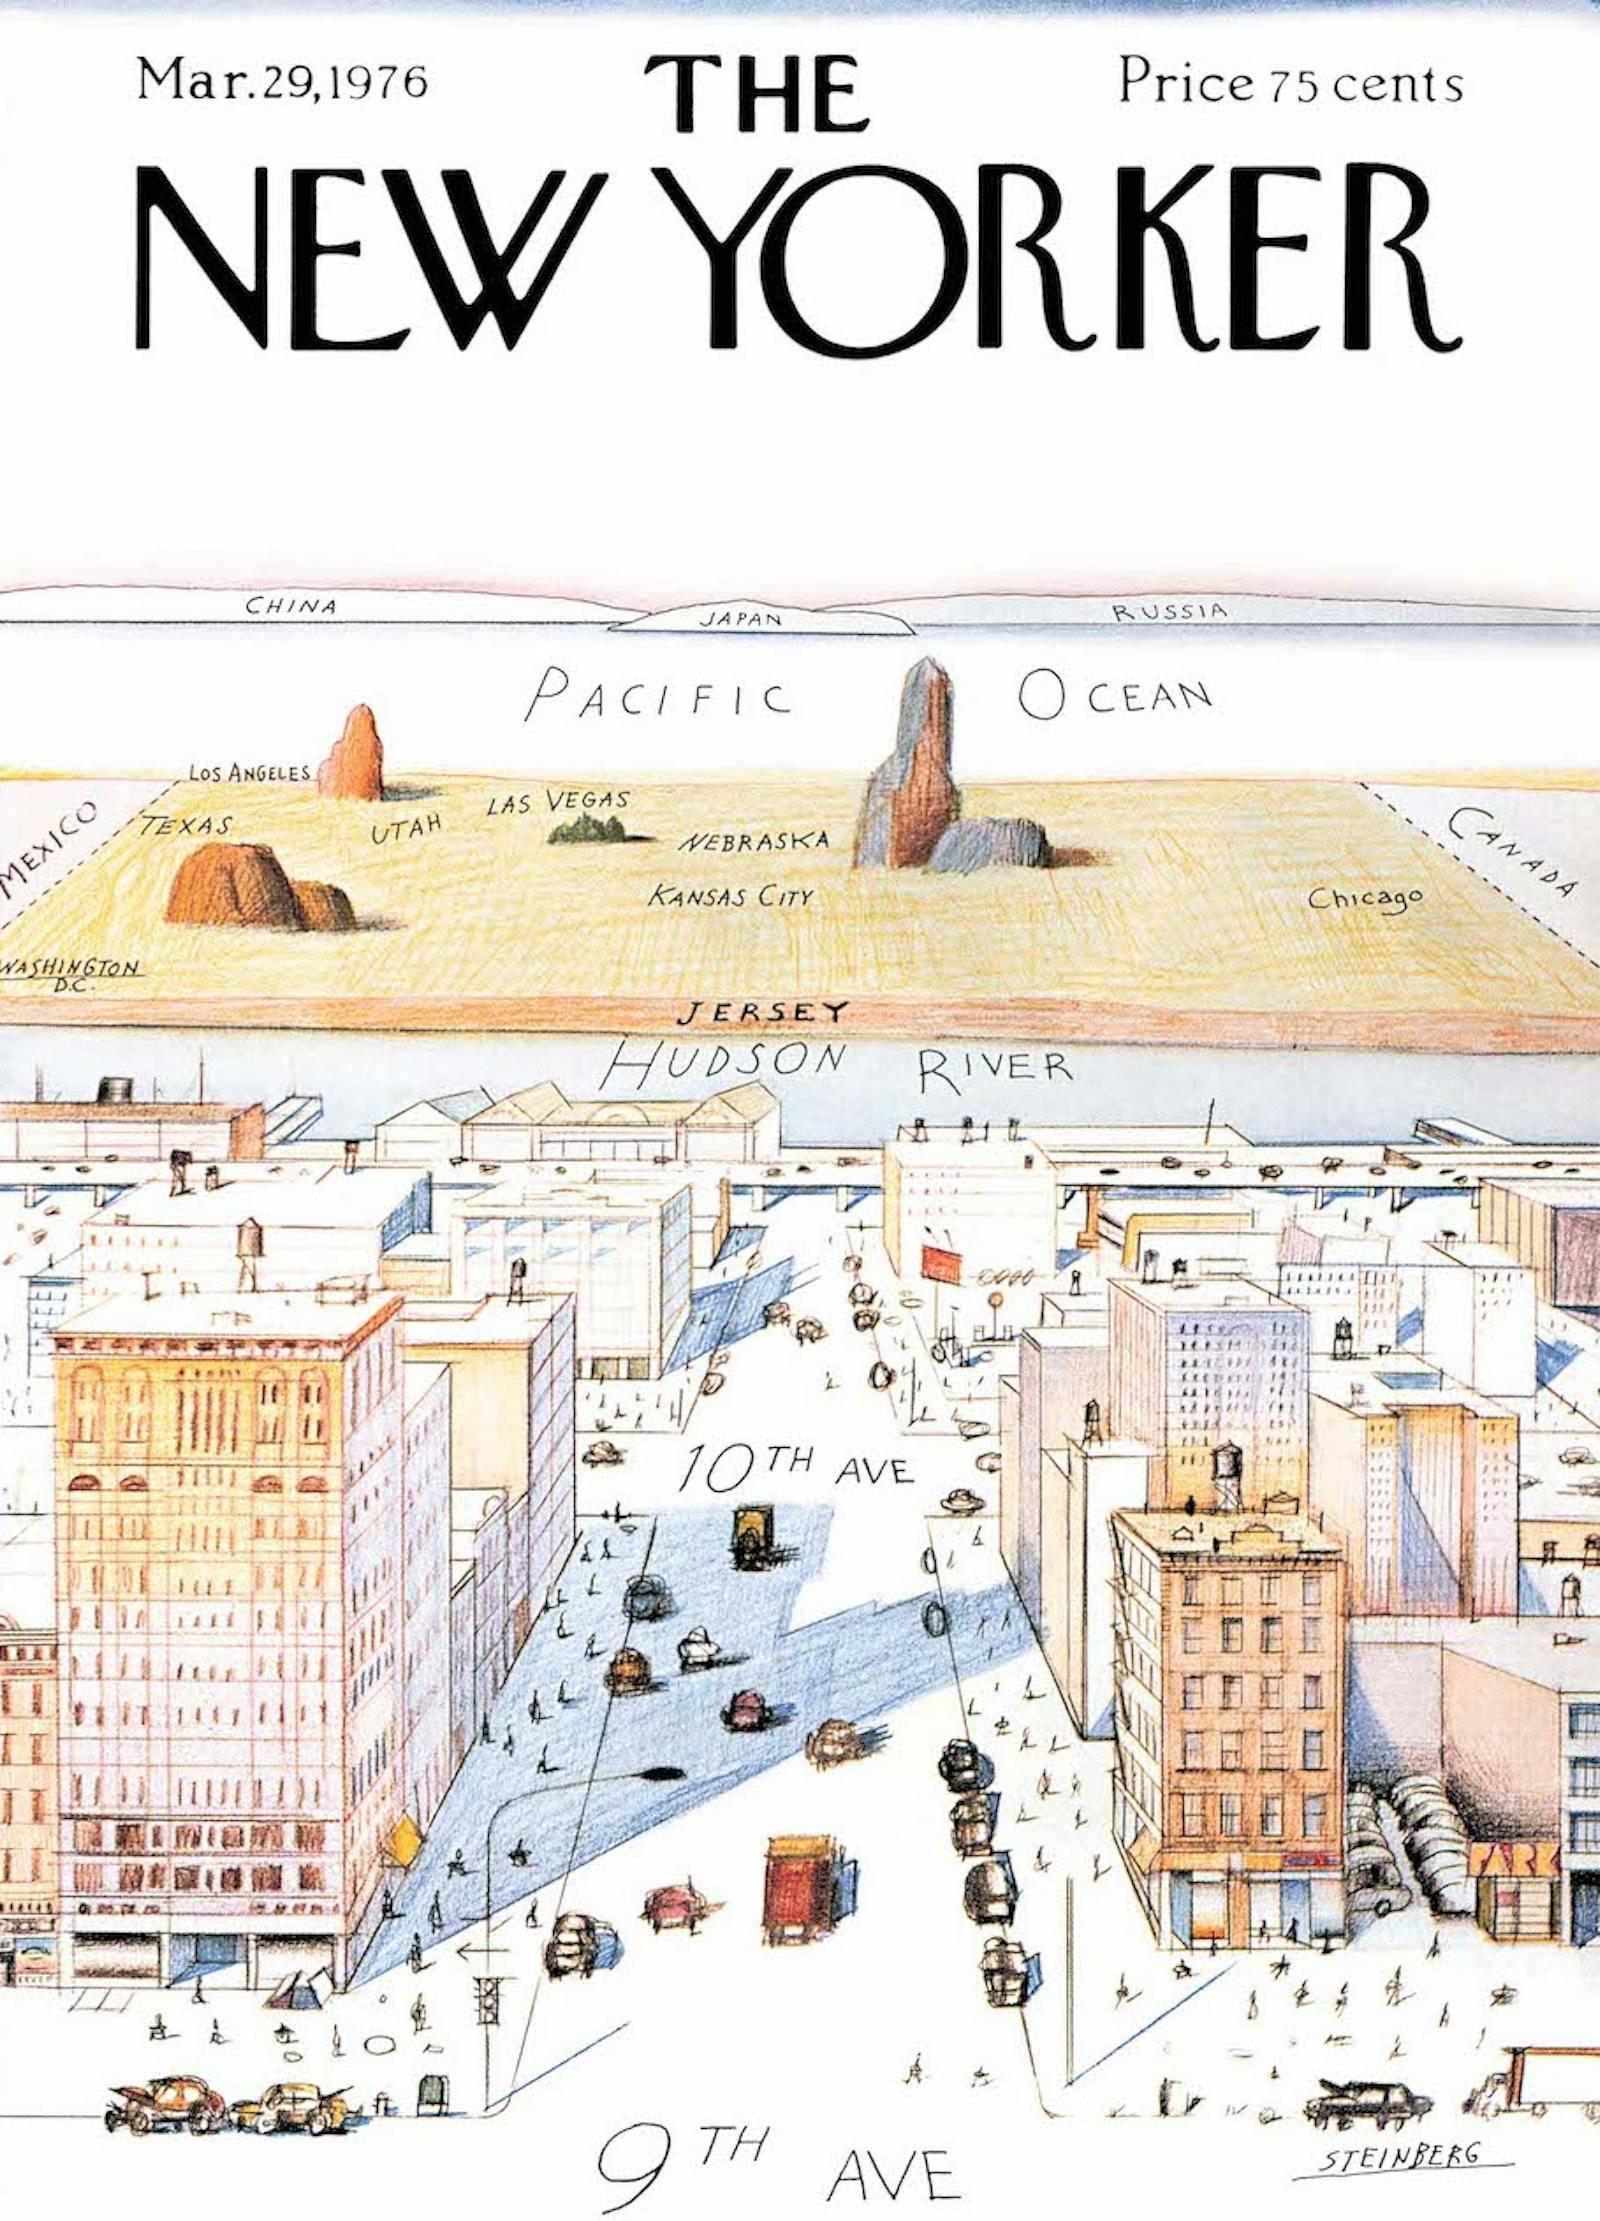 Saul Steinberg, Cover of The New Yorker, Mar.29, 1976 © The Saul Steinberg Foundation /Artists. Rights Society (ARS), New York. Cover reprinted with permission of The New Yorker magazine. All rights reserved.